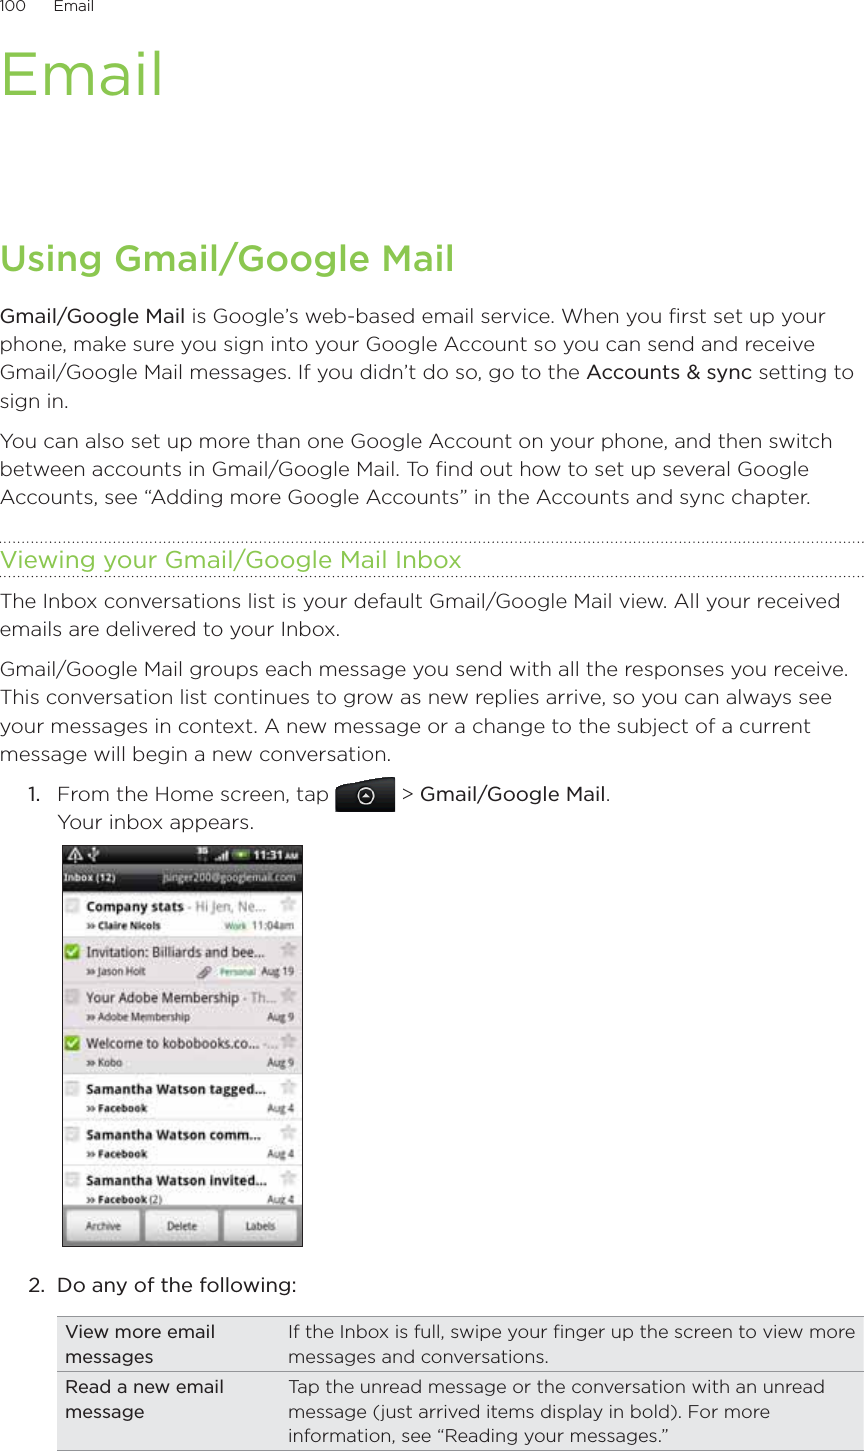 100      Email      EmailUsing Gmail/Google MailGmail/Google Mail is Google’s web-based email service. When you first set up your phone, make sure you sign into your Google Account so you can send and receive Gmail/Google Mail messages. If you didn’t do so, go to the Accounts &amp; sync setting to sign in.You can also set up more than one Google Account on your phone, and then switch between accounts in Gmail/Google Mail. To find out how to set up several Google Accounts, see “Adding more Google Accounts” in the Accounts and sync chapter.Viewing your Gmail/Google Mail InboxThe Inbox conversations list is your default Gmail/Google Mail view. All your received emails are delivered to your Inbox.Gmail/Google Mail groups each message you send with all the responses you receive. This conversation list continues to grow as new replies arrive, so you can always see your messages in context. A new message or a change to the subject of a current message will begin a new conversation.1.  From the Home screen, tap   &gt; Gmail/Google Mail. Your inbox appears. 2.  Do any of the following:View more email messagesIf the Inbox is full, swipe your finger up the screen to view more messages and conversations.Read a new email messageTap the unread message or the conversation with an unread message (just arrived items display in bold). For more information, see “Reading your messages.”